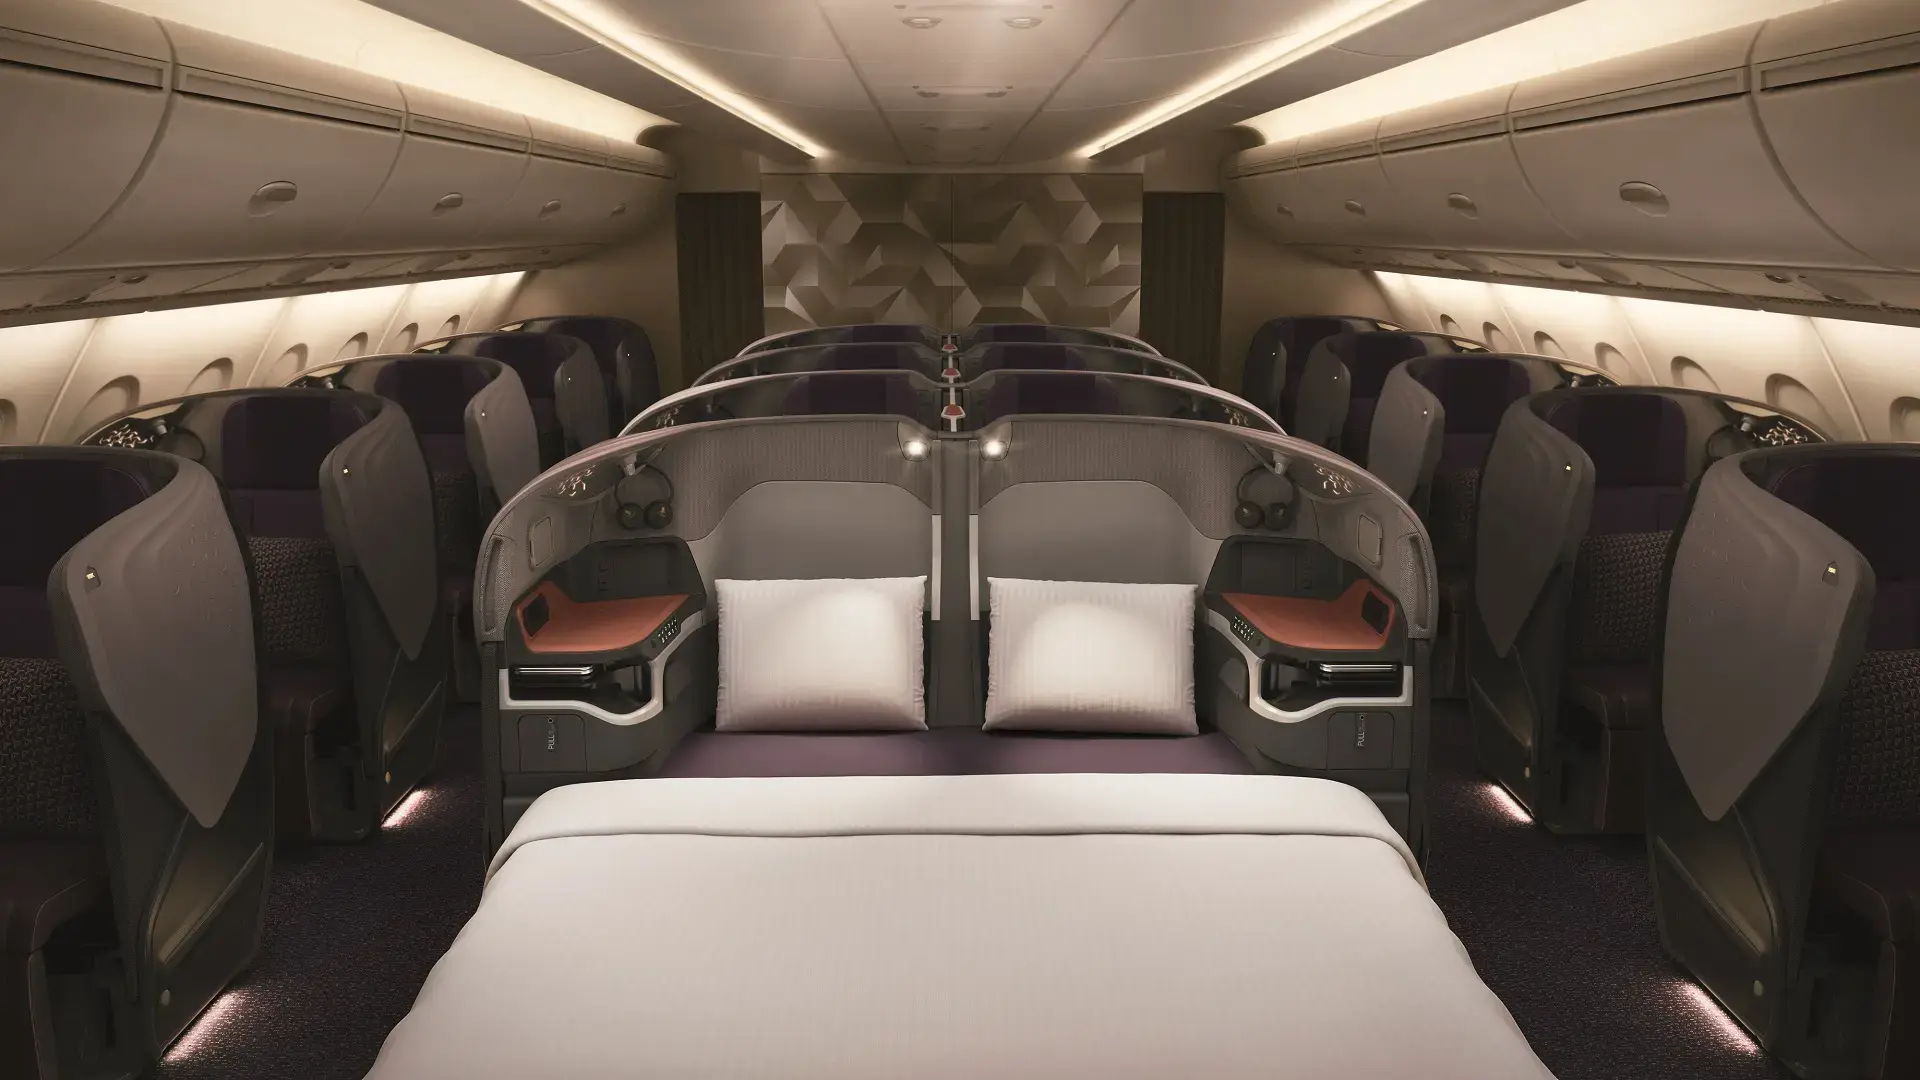 singapore airlines business class seat